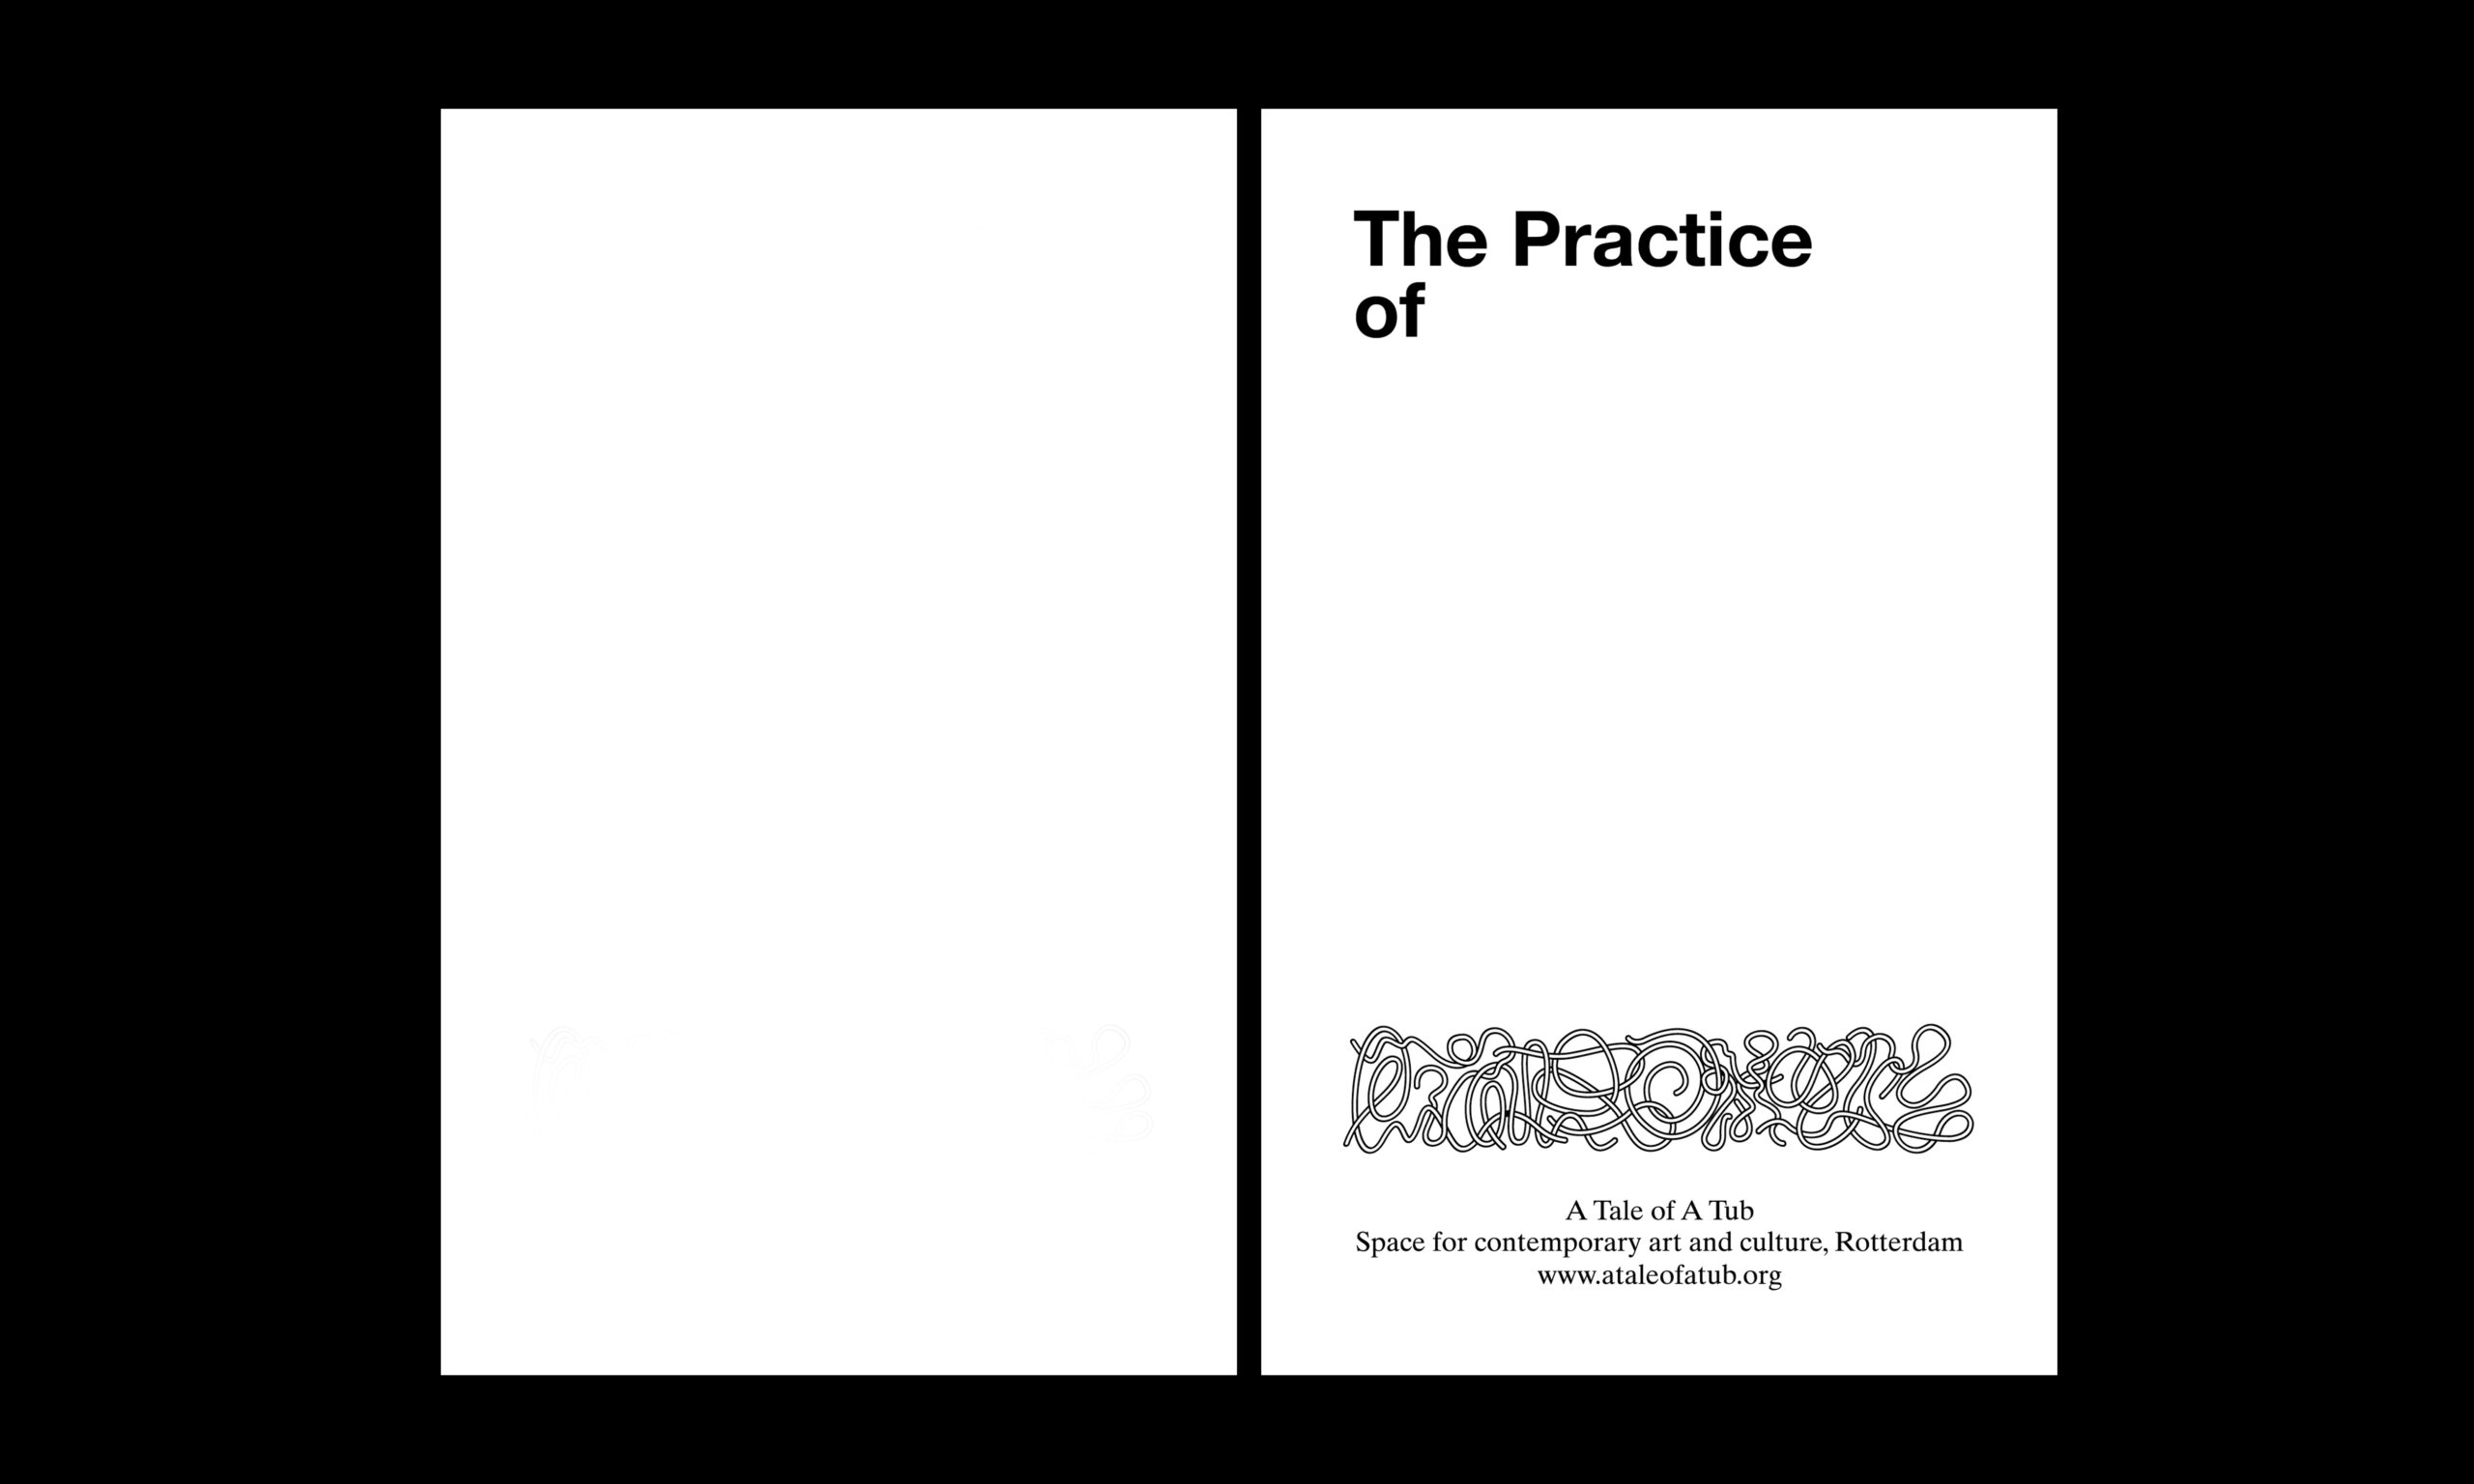 The Practice of – The publication tells several true stories that reflect dilemmas and dogmas that persist in the Dutch art field. Through these examples, the publication aims to portray the hermetically sealed, but economically and morally impoverished ecosystem in which art education institutions, museums, presentation spaces, funding agencies, galleries, art fairs, and their workers such as artists, curators, art brokers, art educators, and art mediators, are involved.